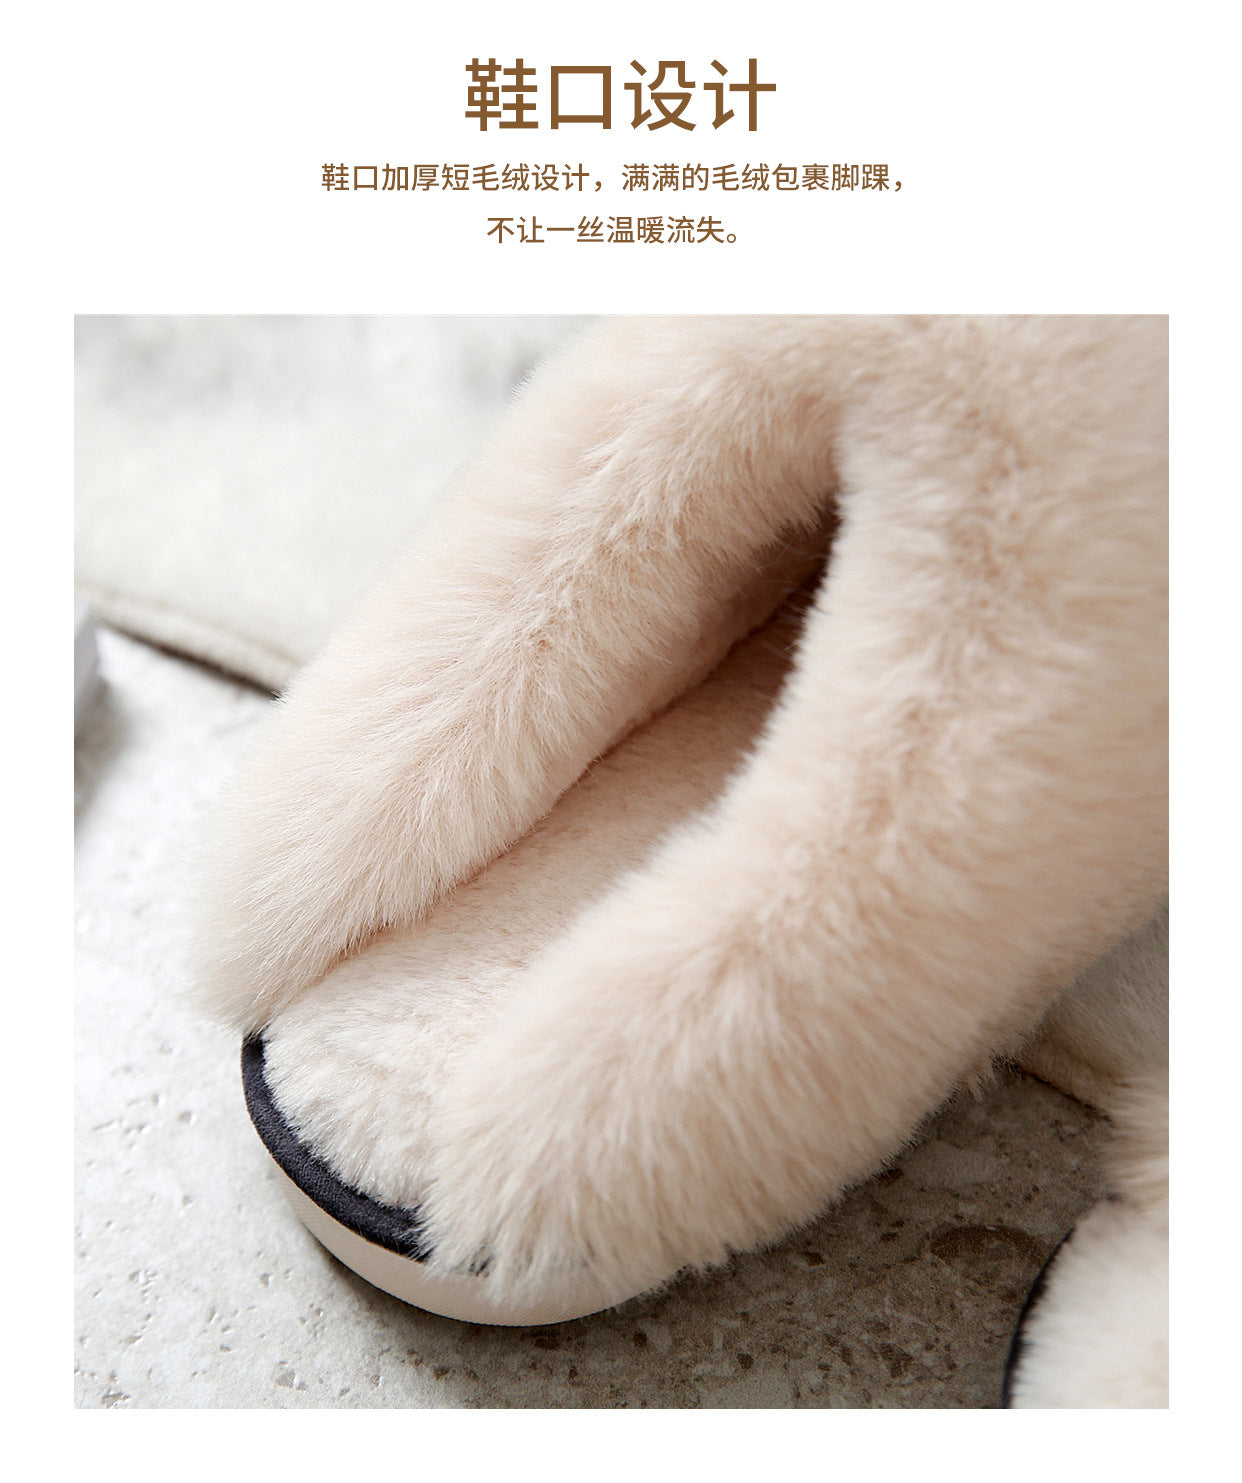 Womens Warm and Plush Clog Slippers - Slippers Galore